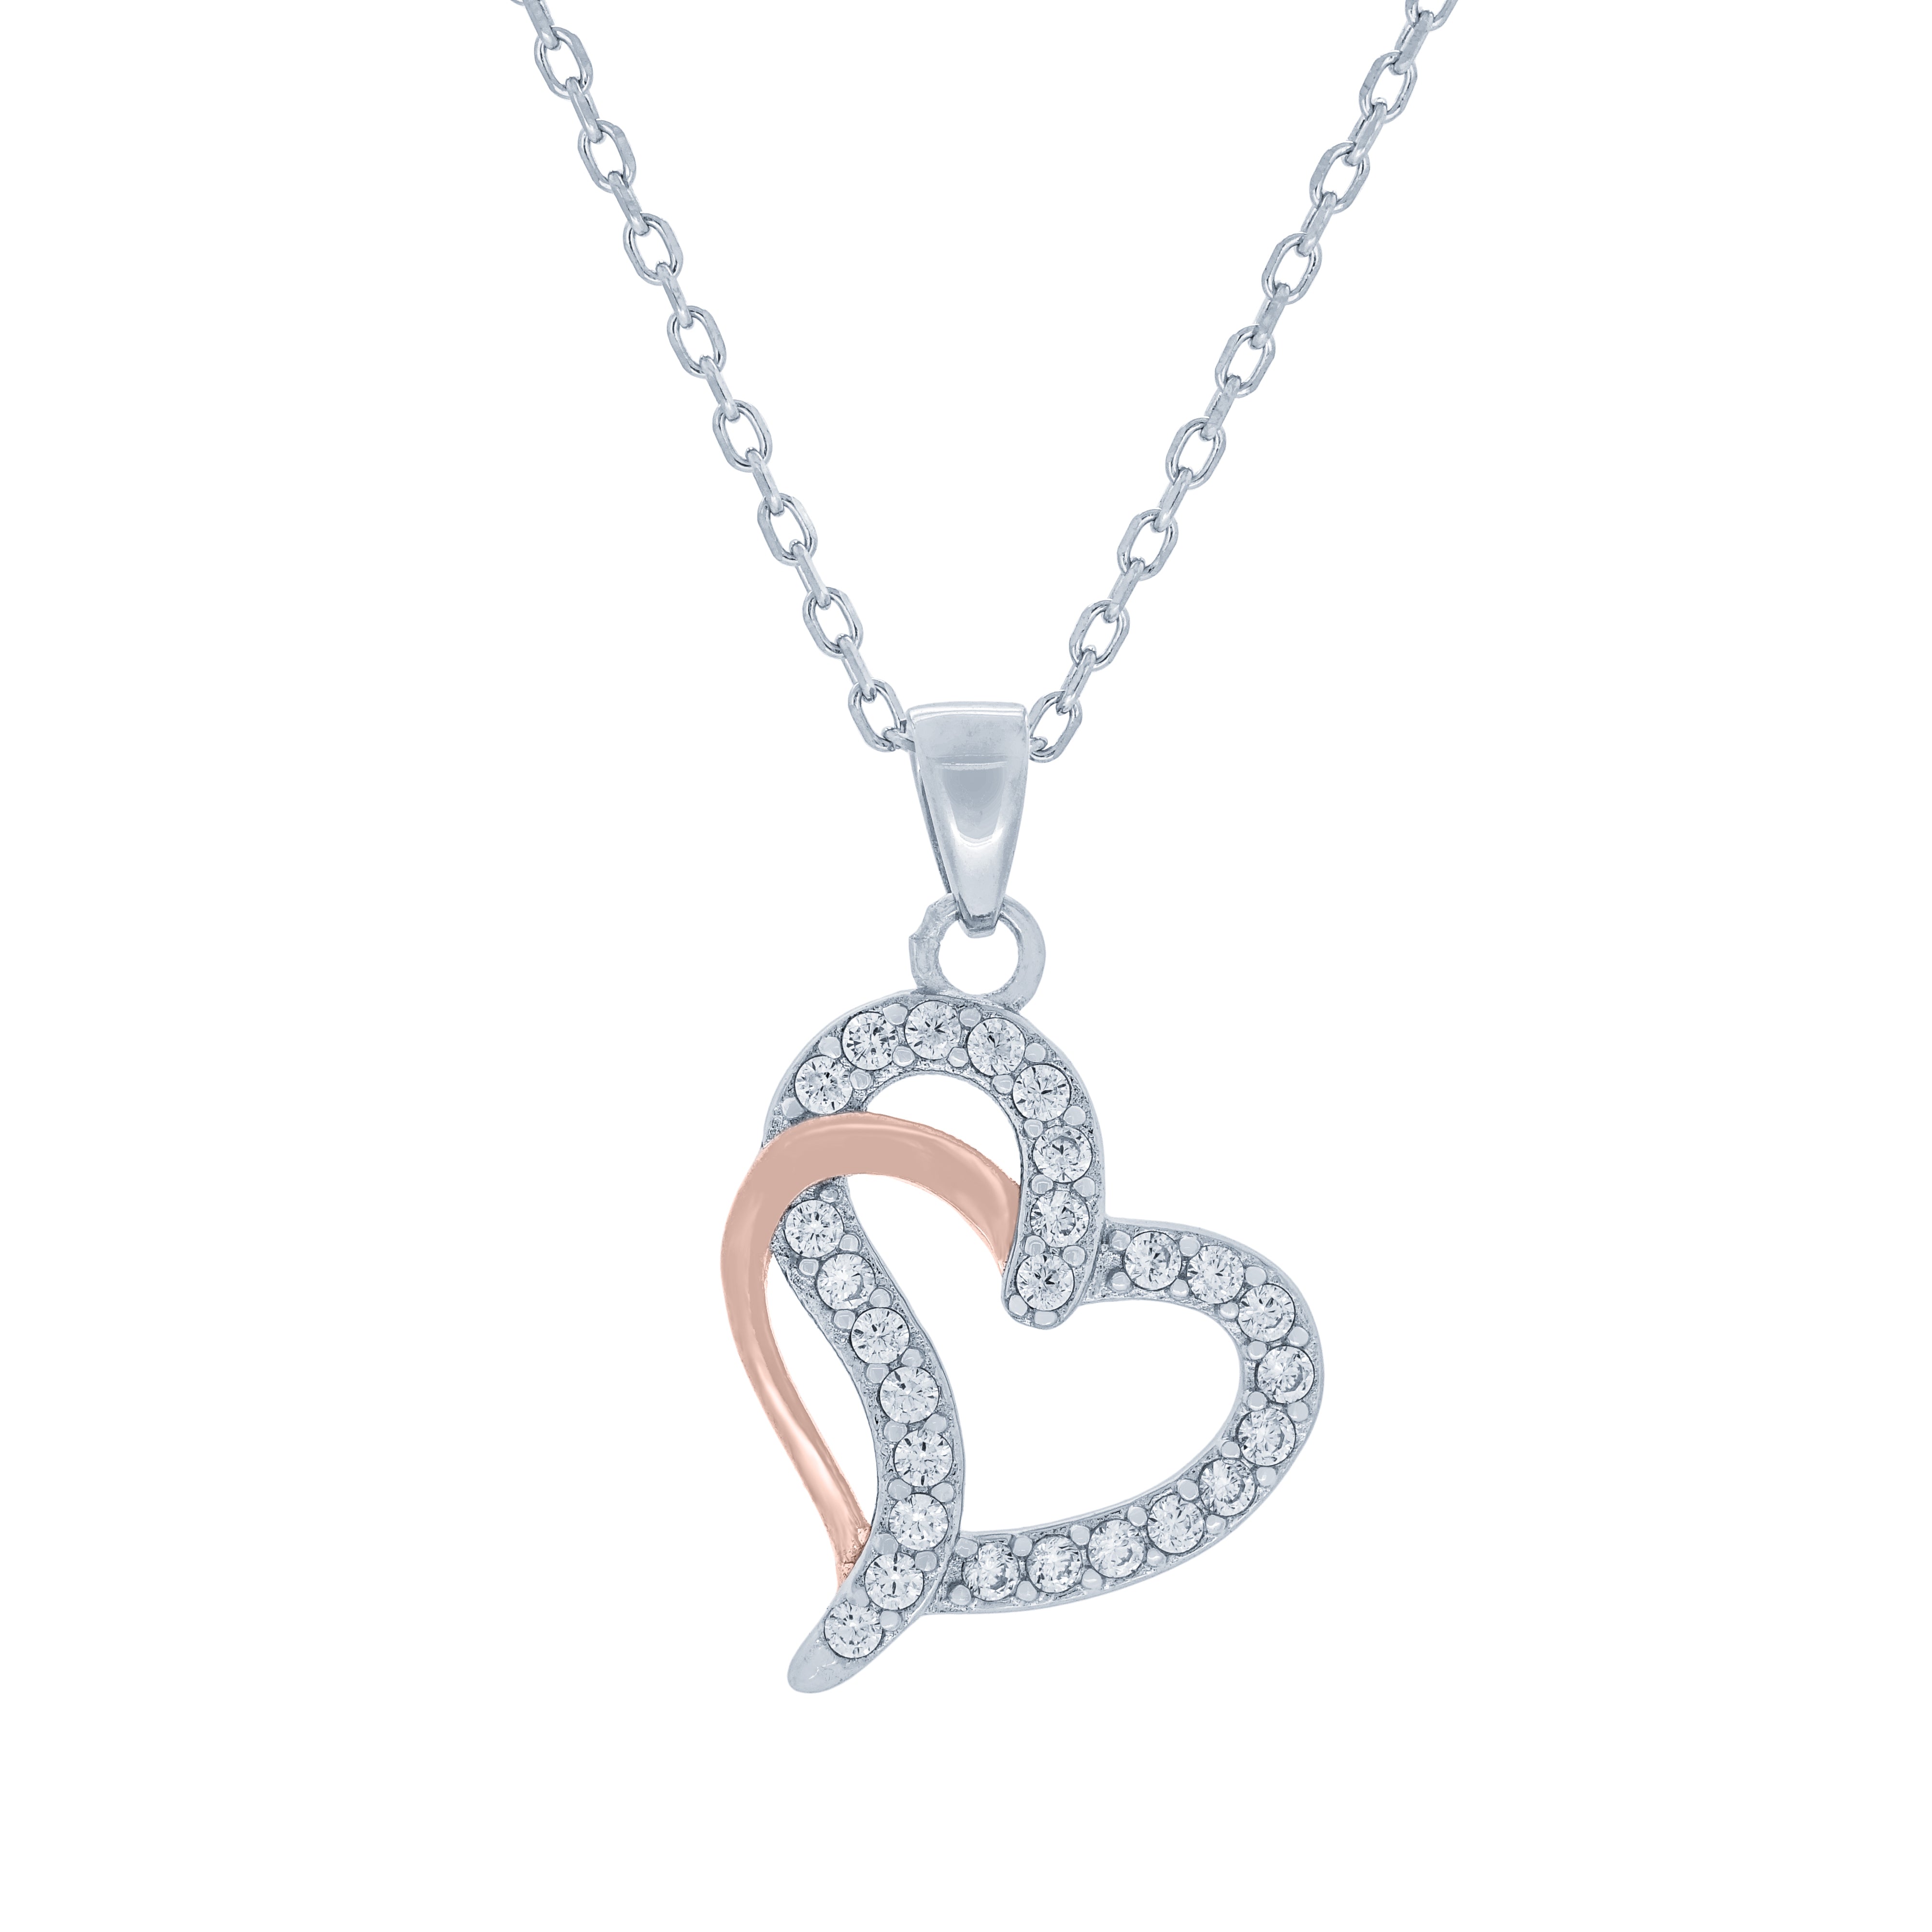 (100150) White Cubic Zirconia Heart Pendant Necklace In Sterling Silver and Rose Gold Plate